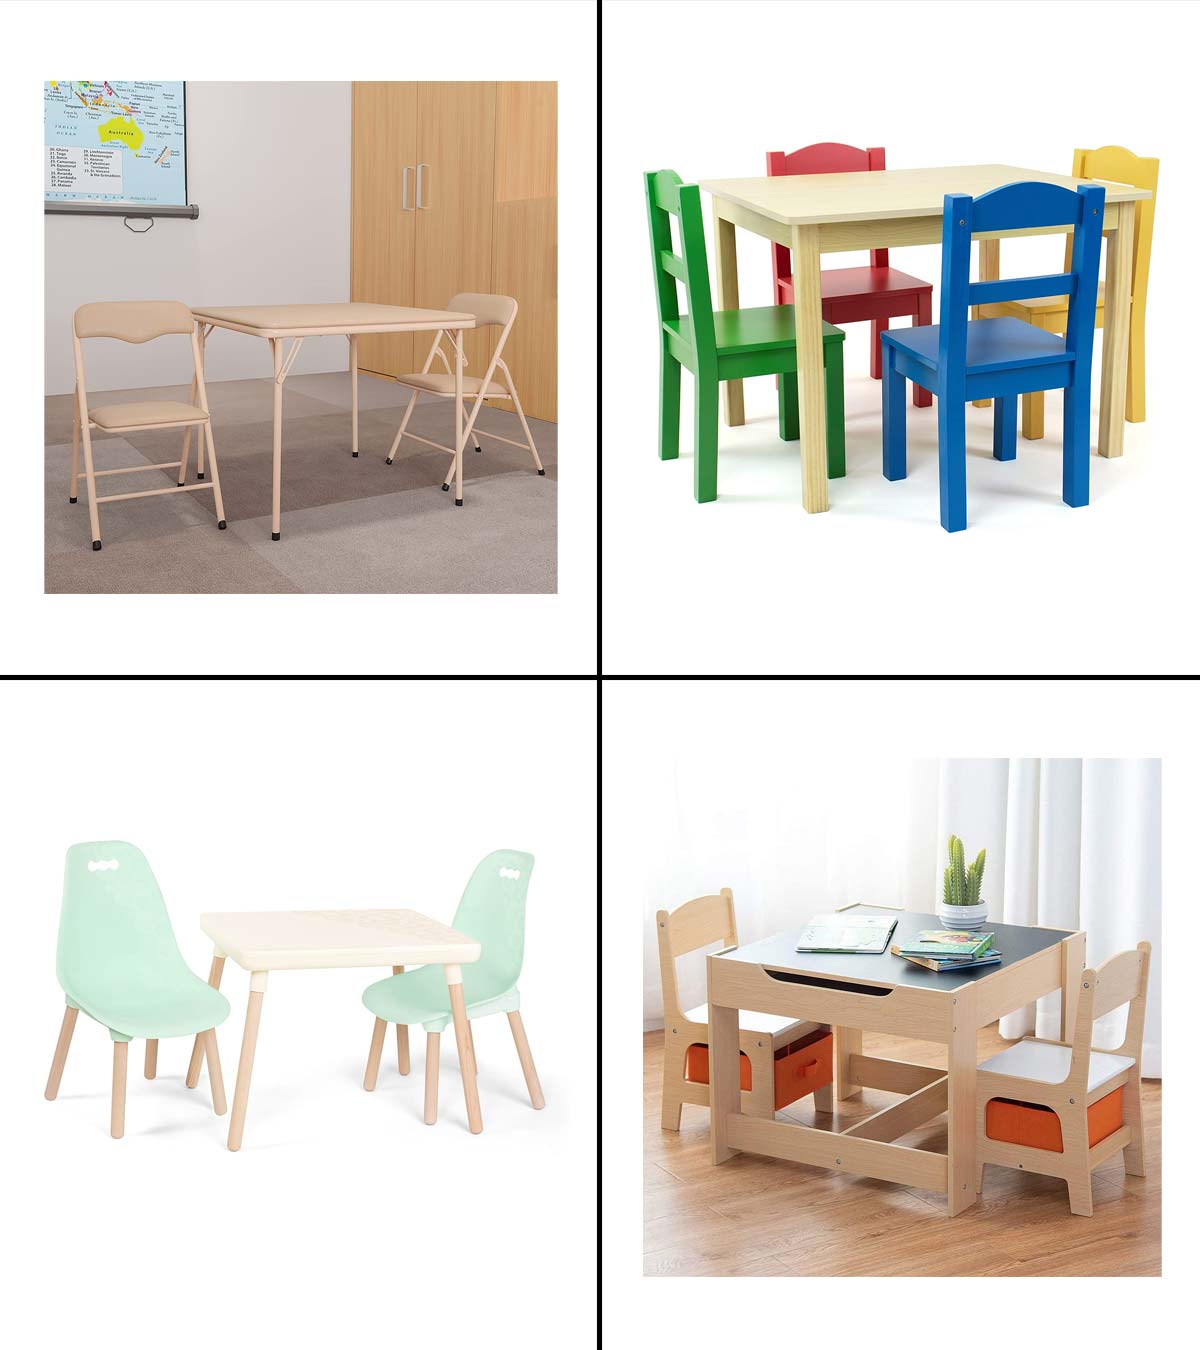 18 Best Toddler Tables And Chairs That Are Safe To Use, 18